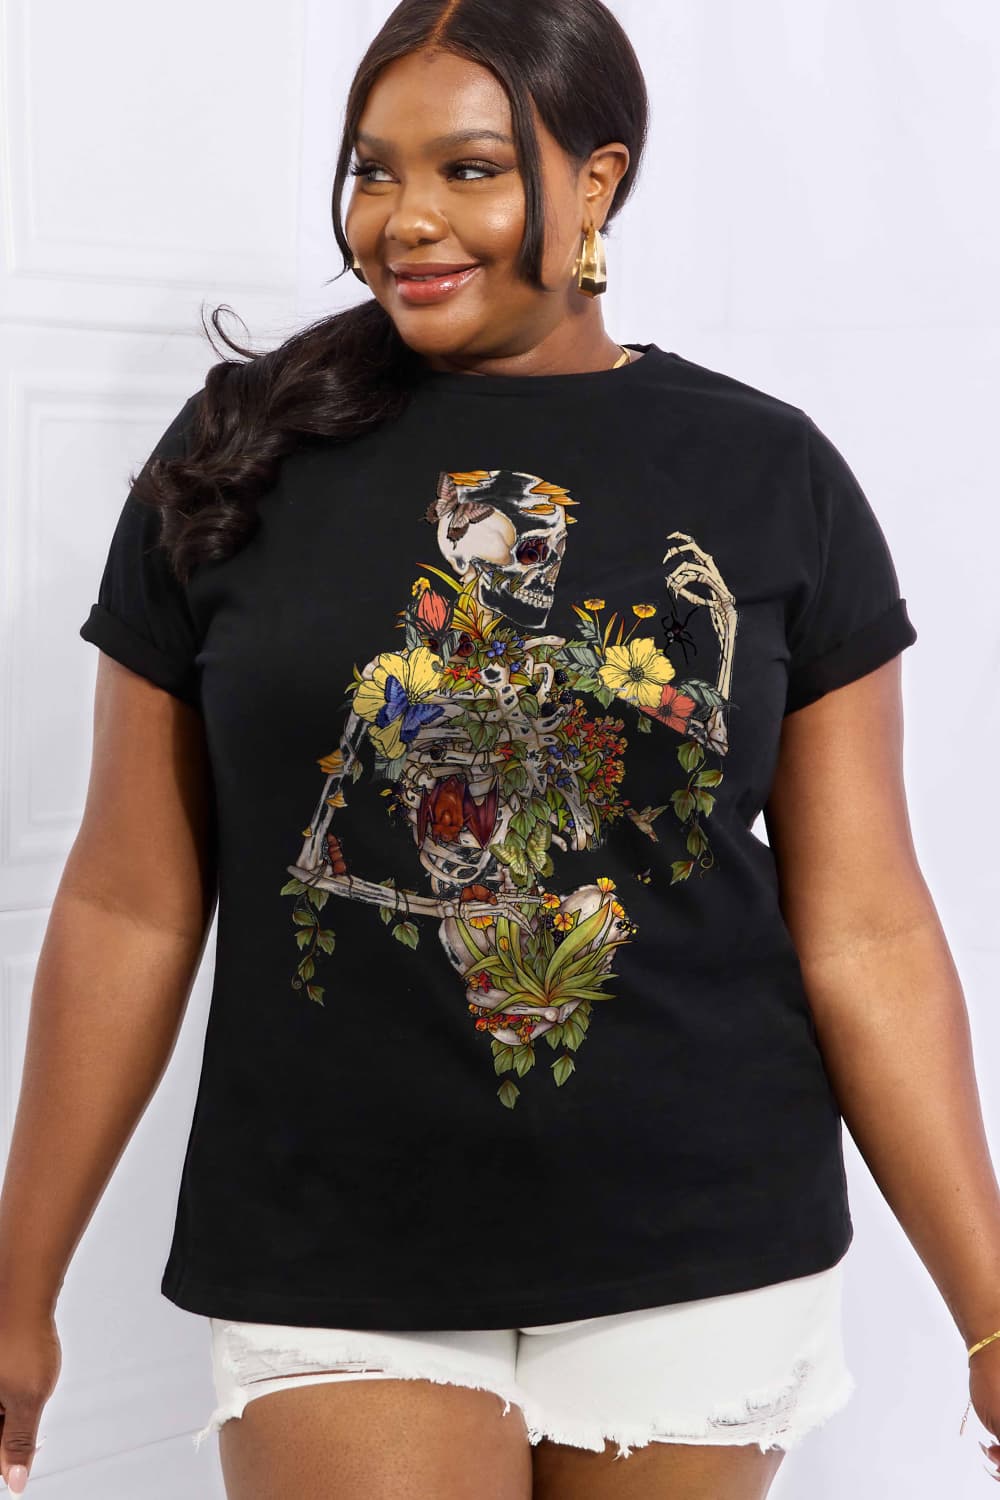 Full Size Skeleton Graphic Cotton Tee - Black / S - T-Shirts - Shirts & Tops - 7 - 2024